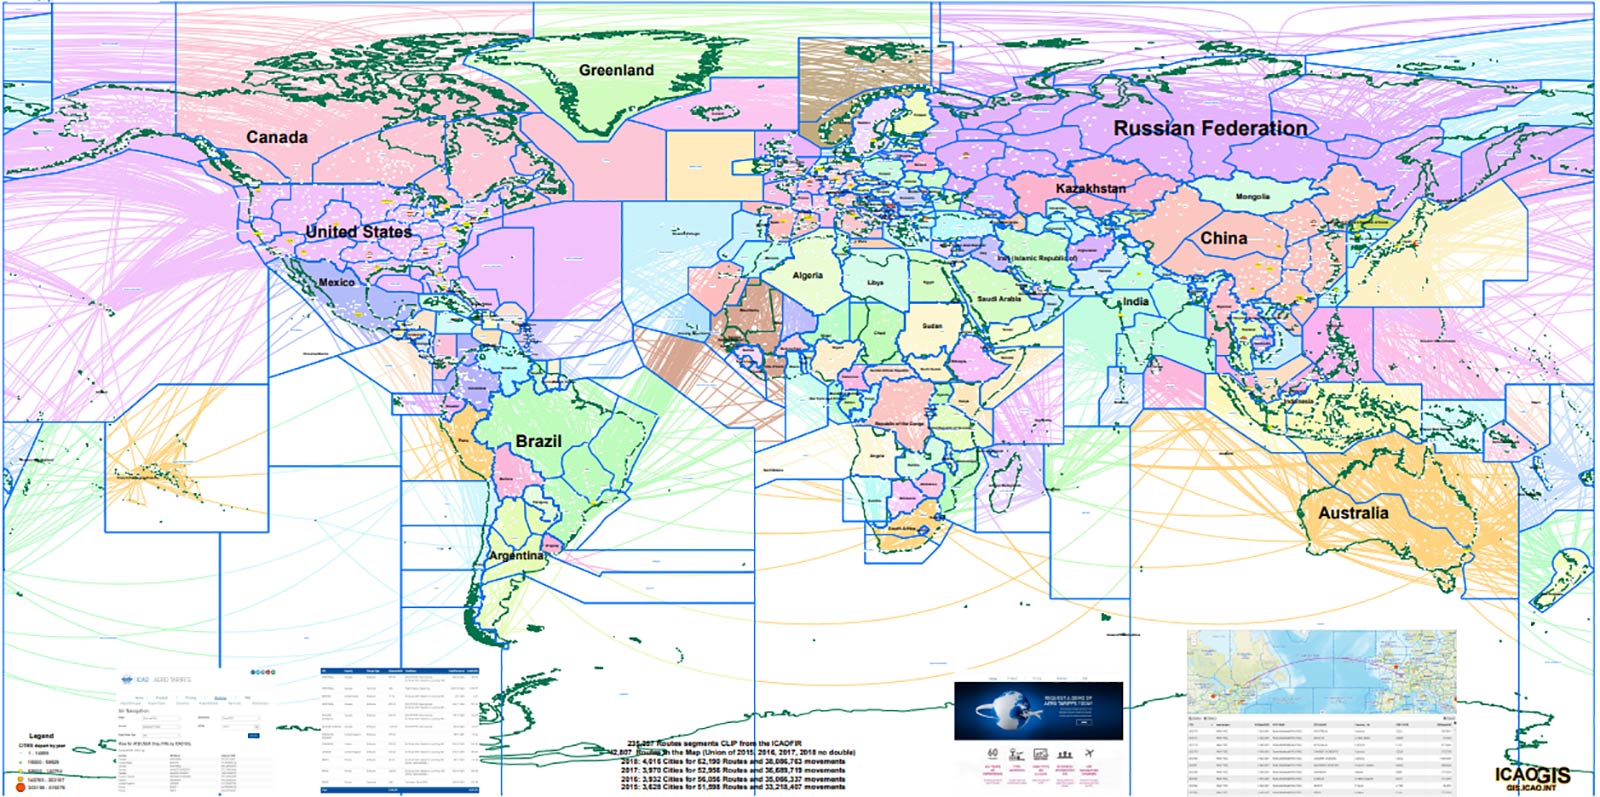 The world's airspace is broken up into flight information regions | Source: ICAO